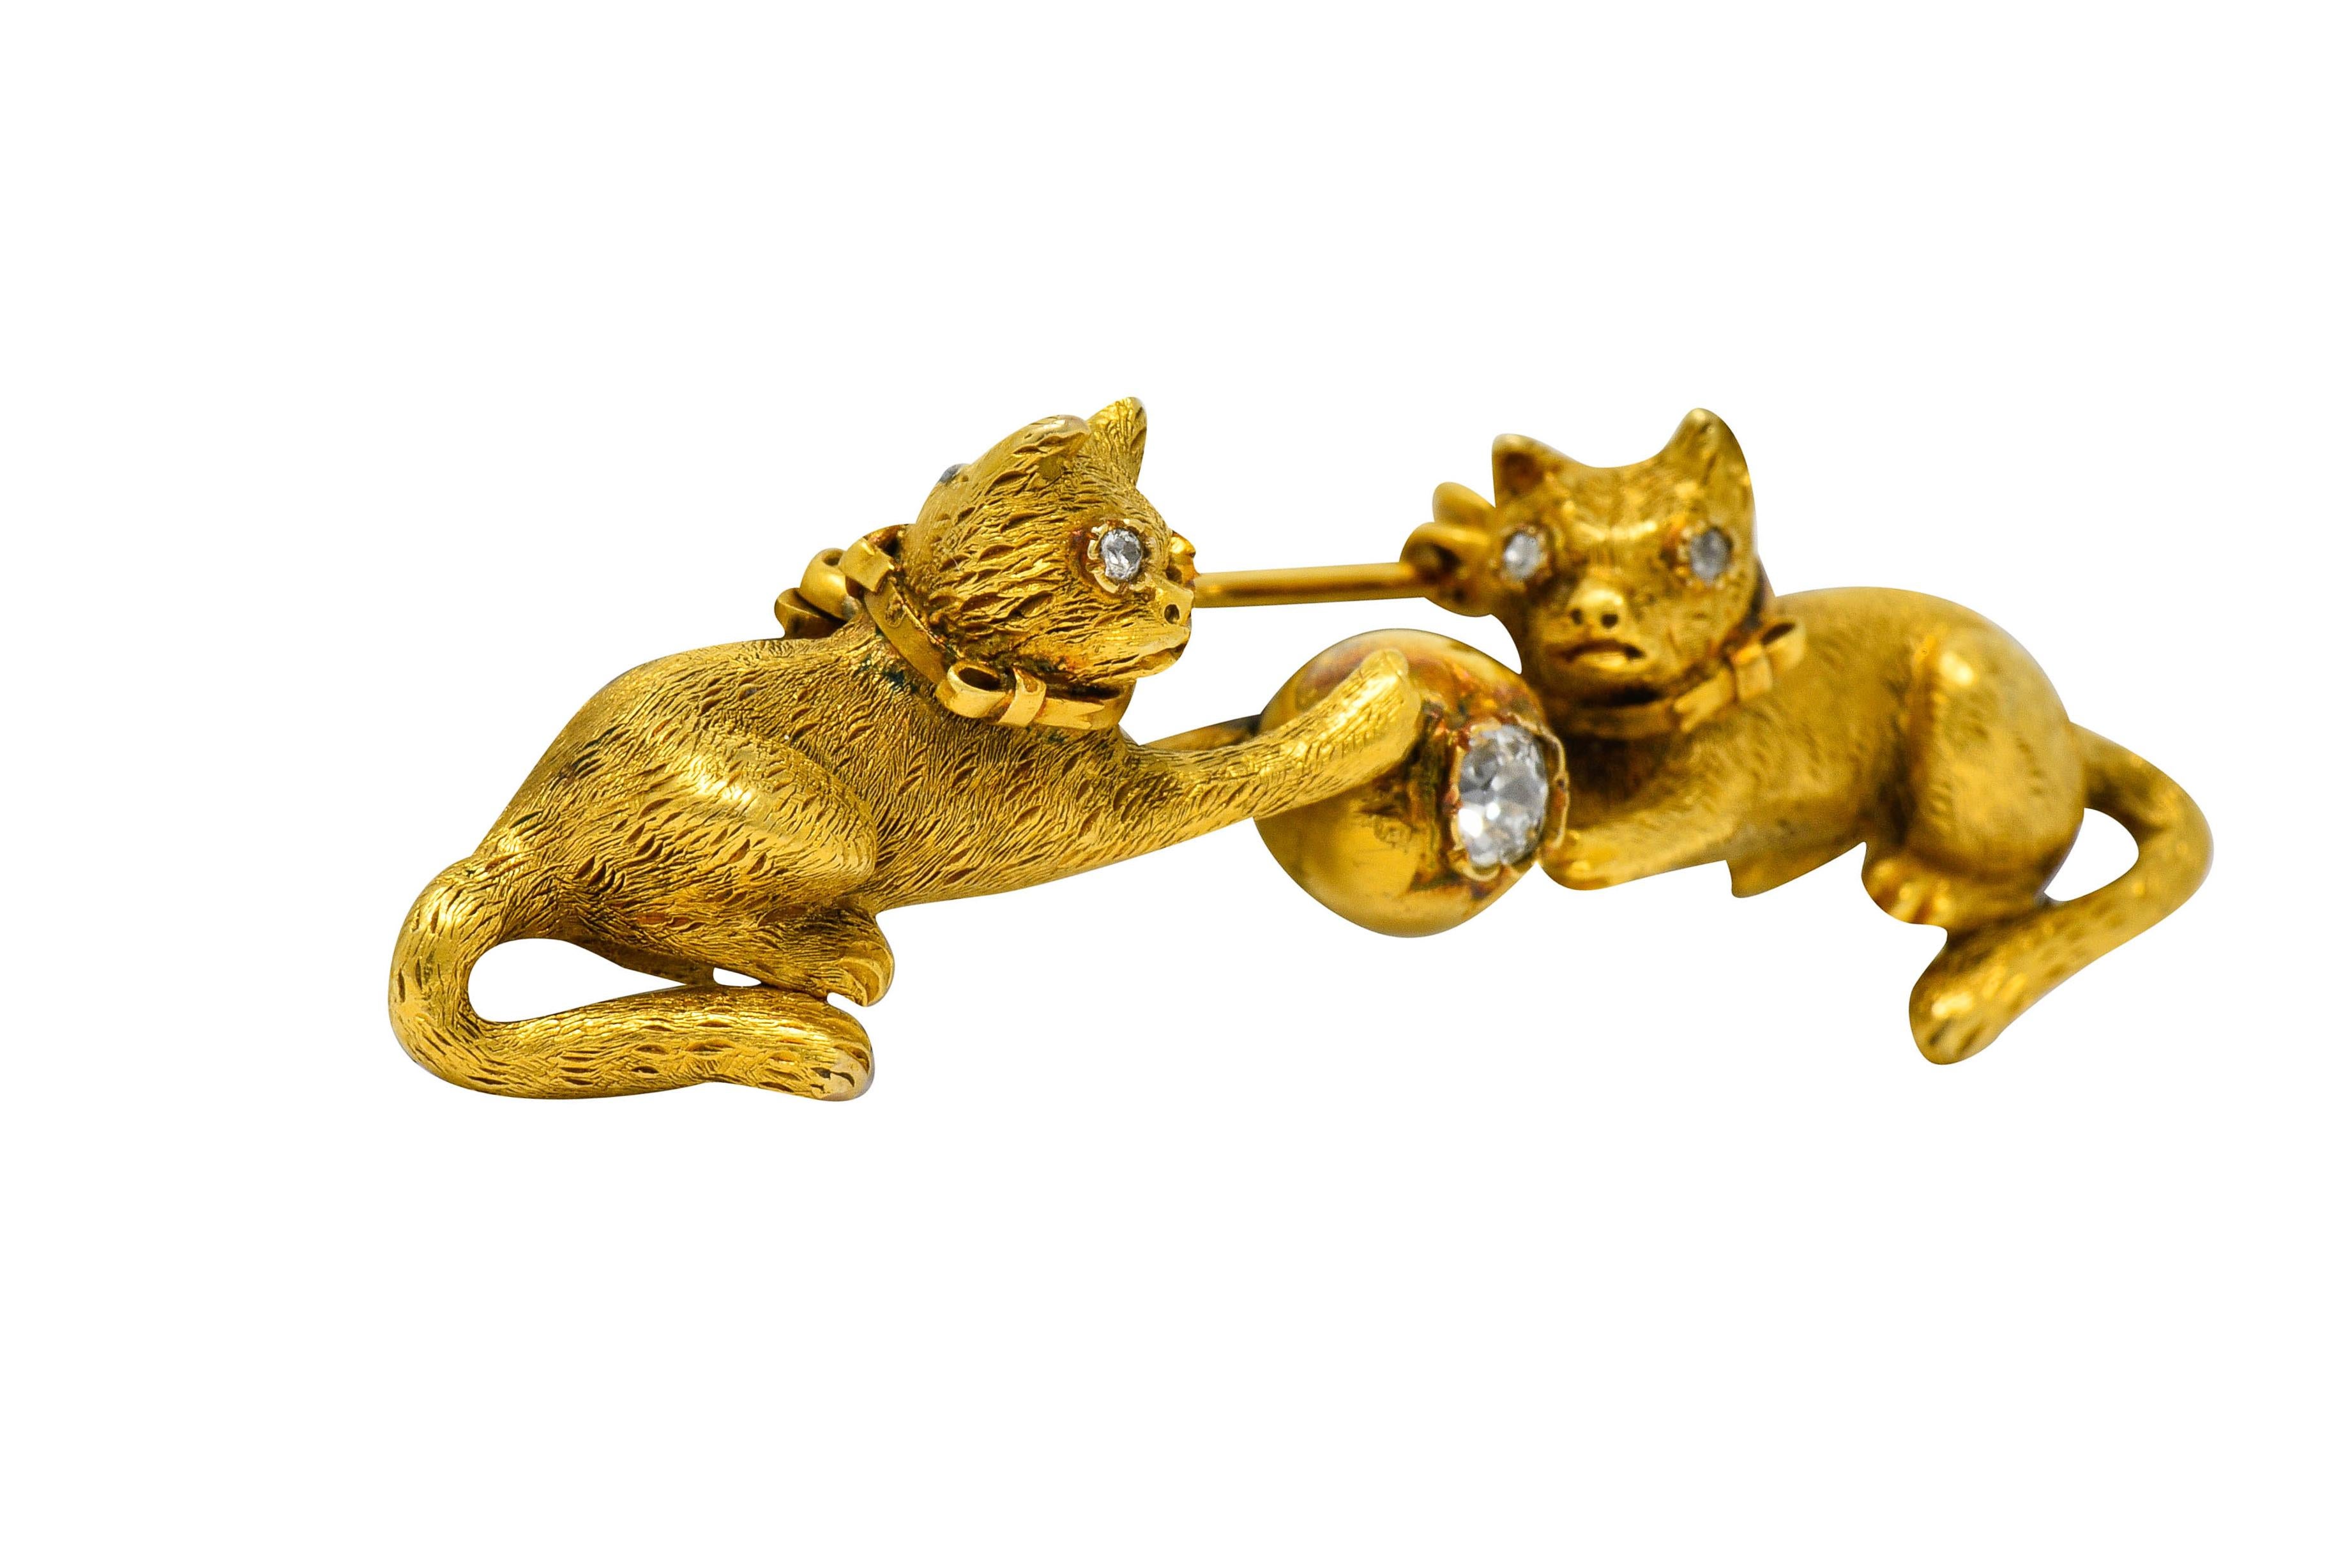 Bar style brooch designed as two playful kittens pawing a ball

Centering an old mine cut diamond weighing approximately 0.30 carat, J/K color with SI clarity

Kittens are highly rendered with textured fur

Eyes are bezel set old European cut